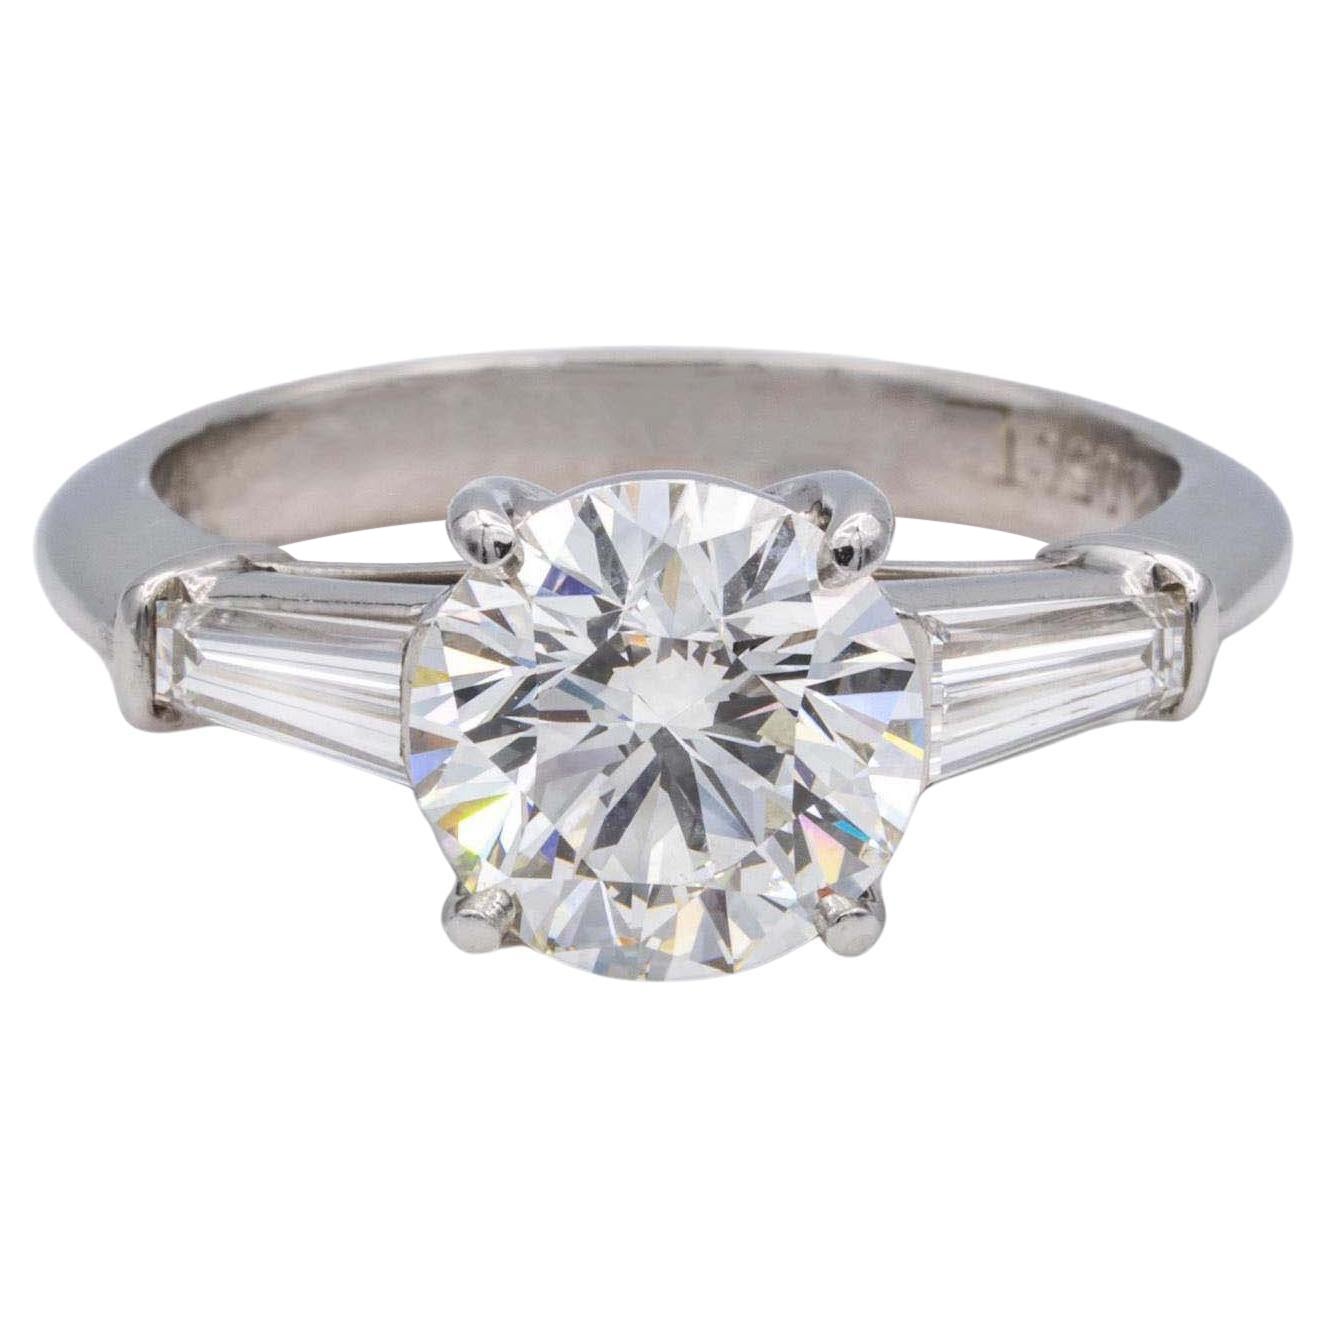 Tiffany & Co. Platinum Diamond Engagement Ring Round with Baguettes 2.65Ct Total